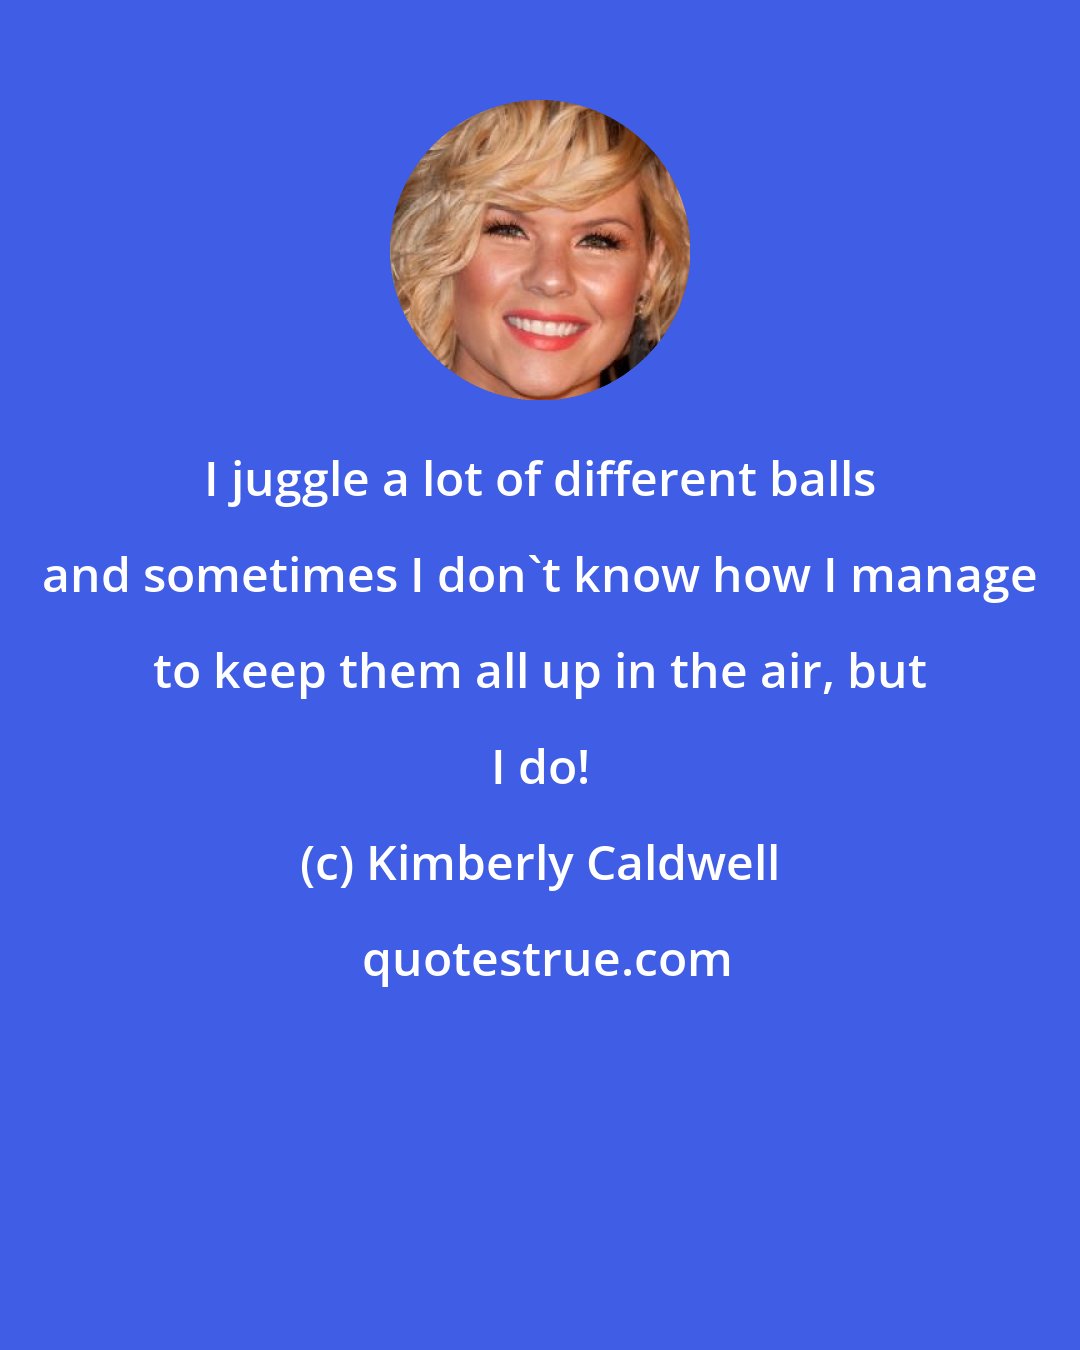 Kimberly Caldwell: I juggle a lot of different balls and sometimes I don't know how I manage to keep them all up in the air, but I do!